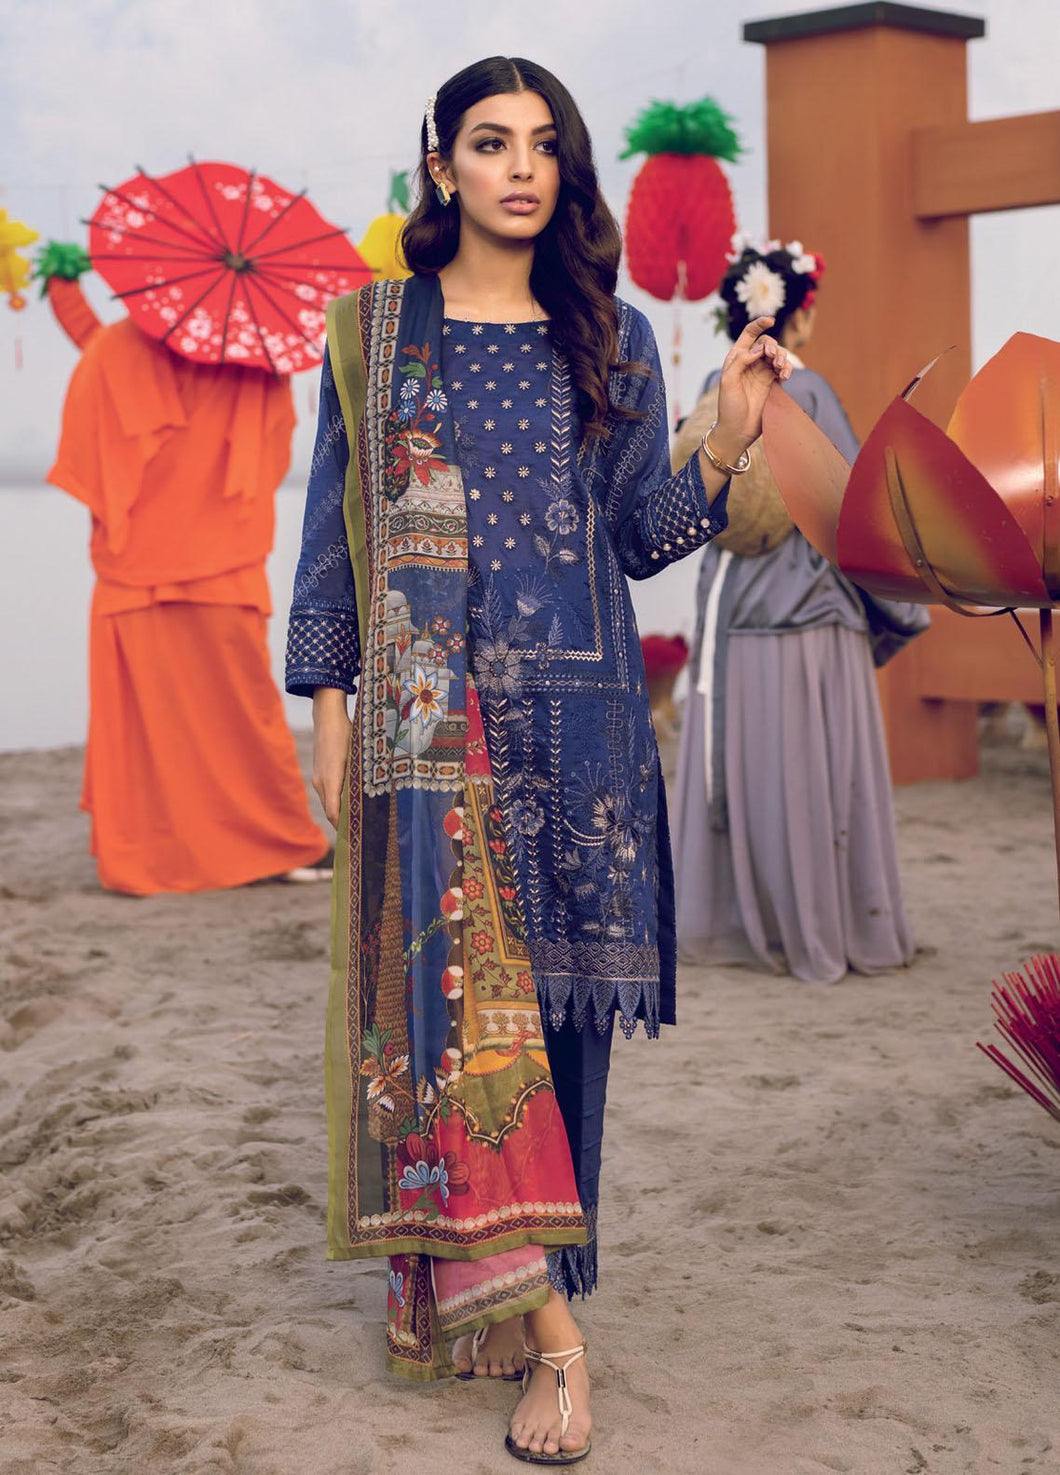 Buy Iznik Luxury Lawn 2021| Arcane | 08 Blue Dress at exclusive rates Buy unstitched or customized dresses of IZNIK LAWN 2021, MARIA B M PRINT LUXURY LAWN IMROZIA 2021, Gulal dresses of Evening wear, Party wear and NIKAH OUTFITS ASIAN PARTY WEAR Dresses can be available easily at USA & UK at best price in Sale!